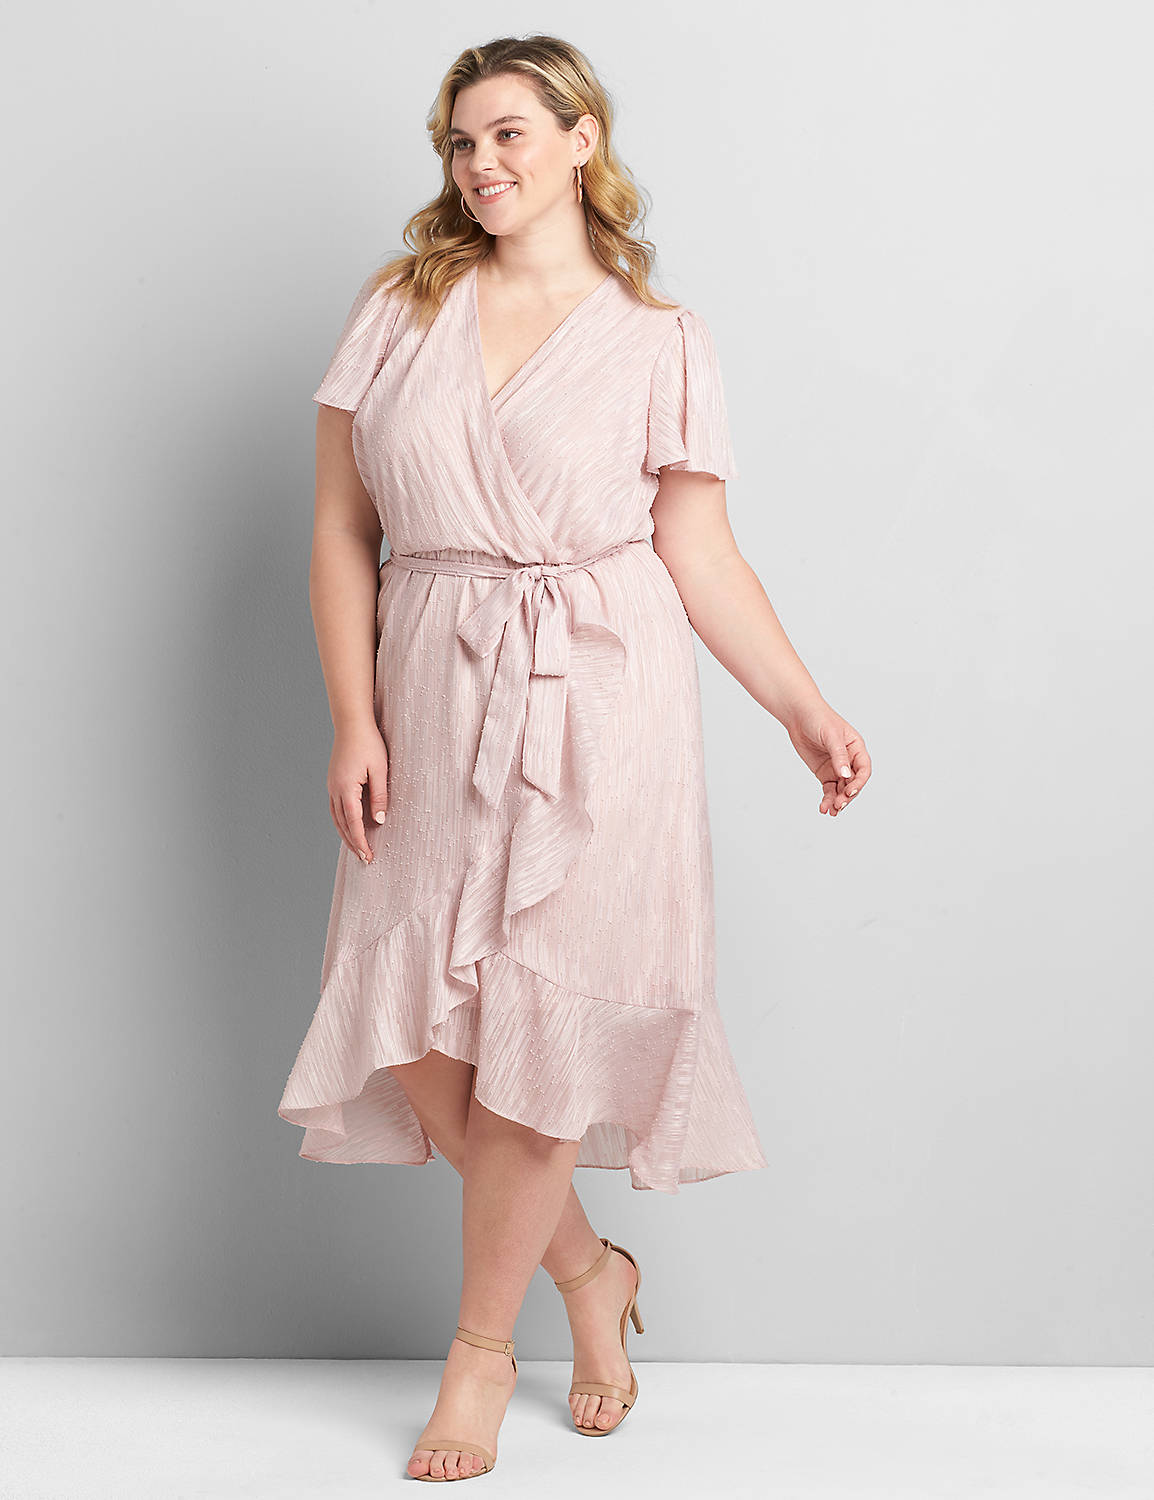 Short Flutter Sleeve Vneck Wrap Dress In Chiffon 1119442:Pink As Is:28 Product Image 1